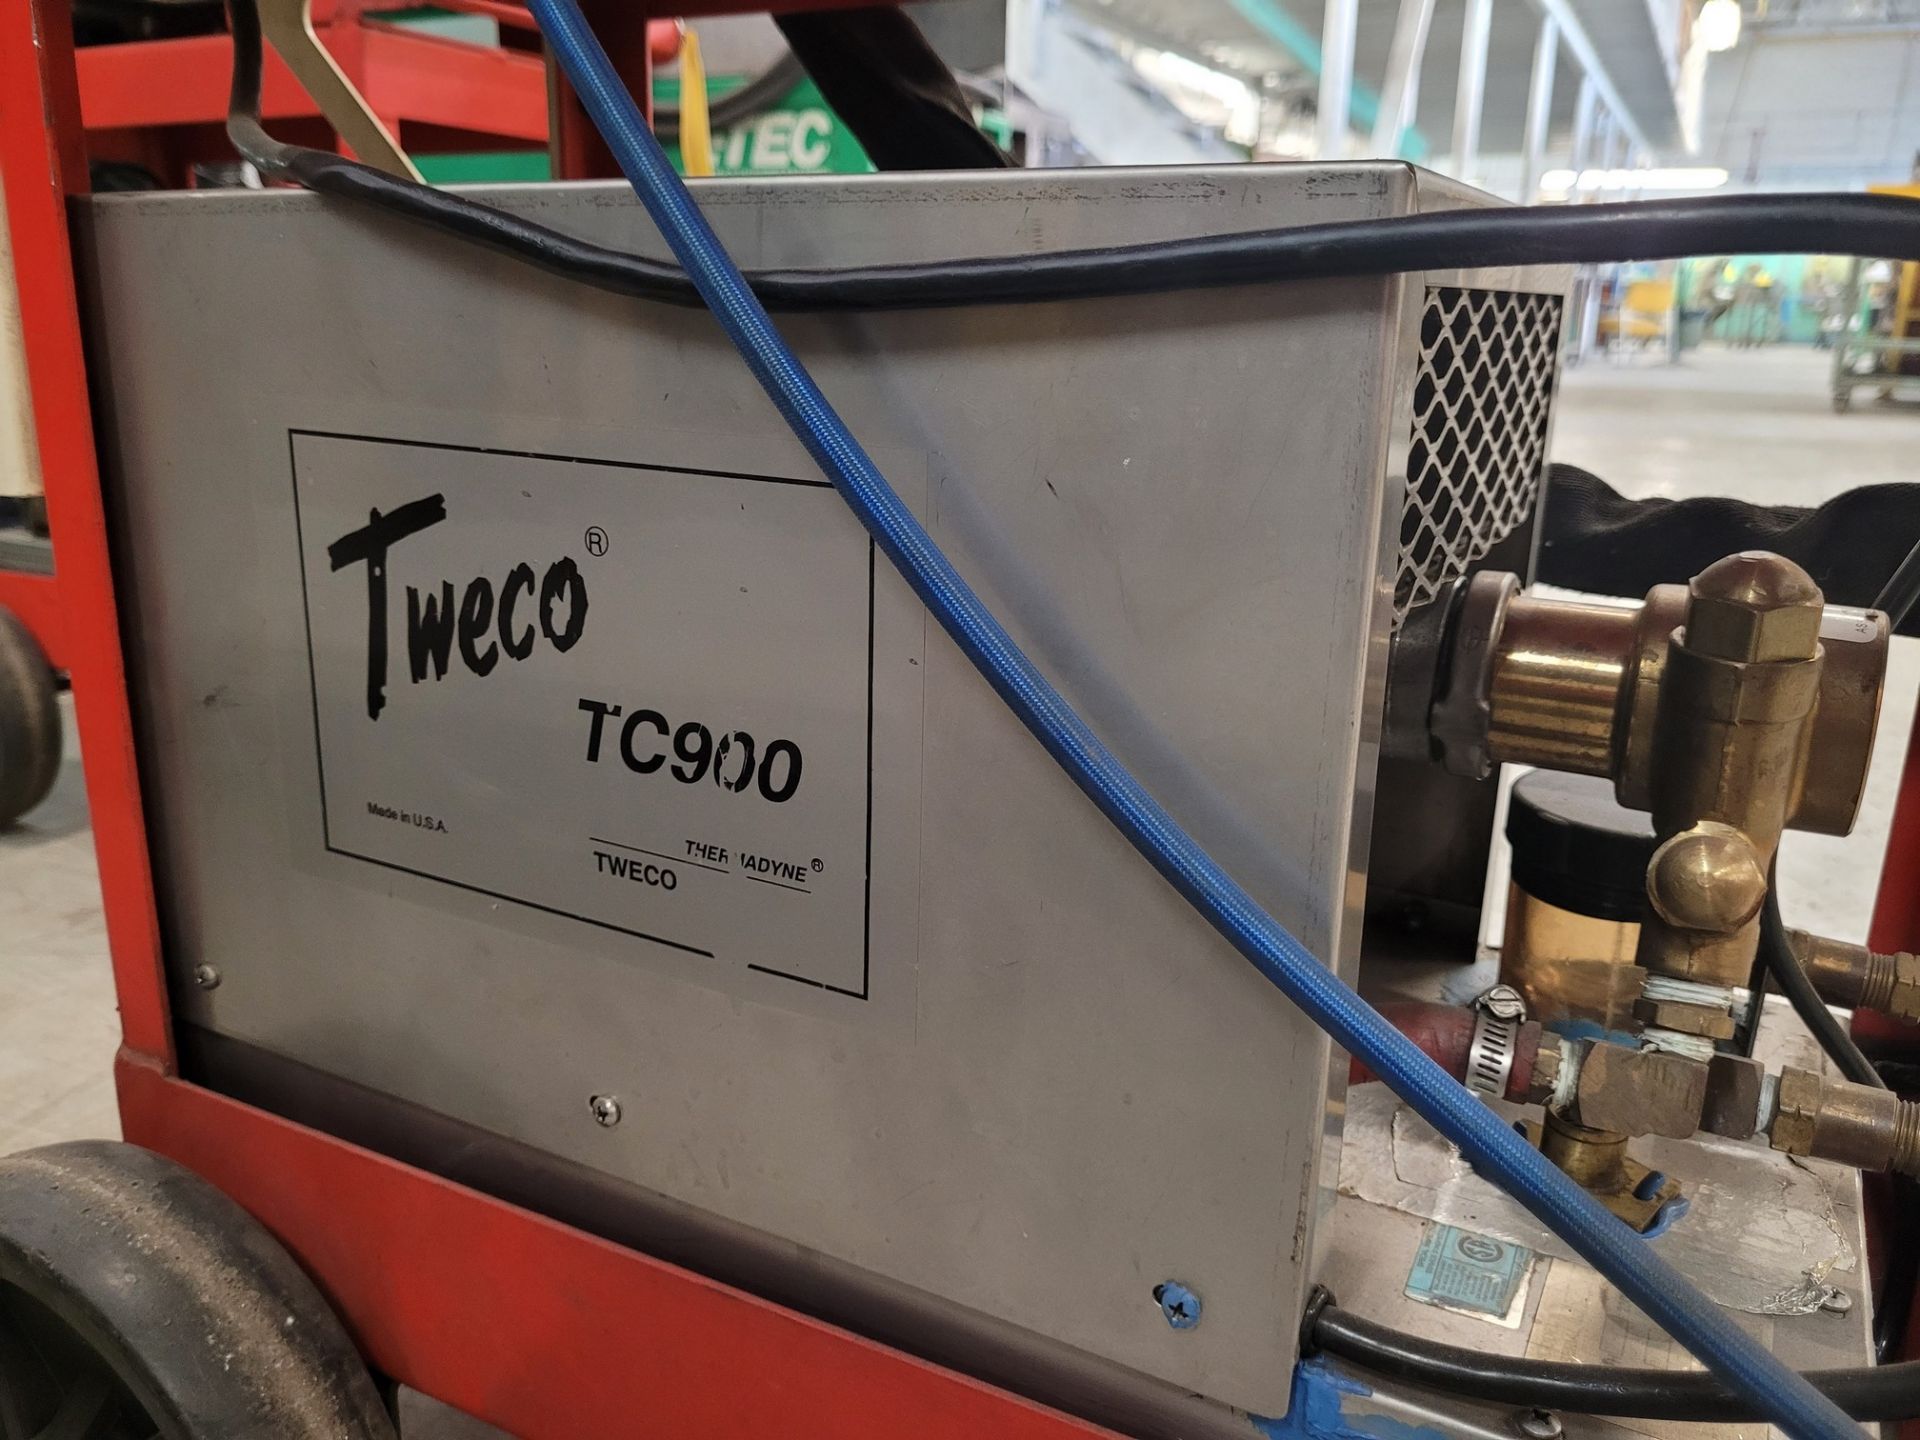 THERMAL ARC 300GTSW ARC WELDER, S/N 000930A188809G W/ TWECO TC900 COOLING UNIT (NO TANKS) - Image 6 of 6